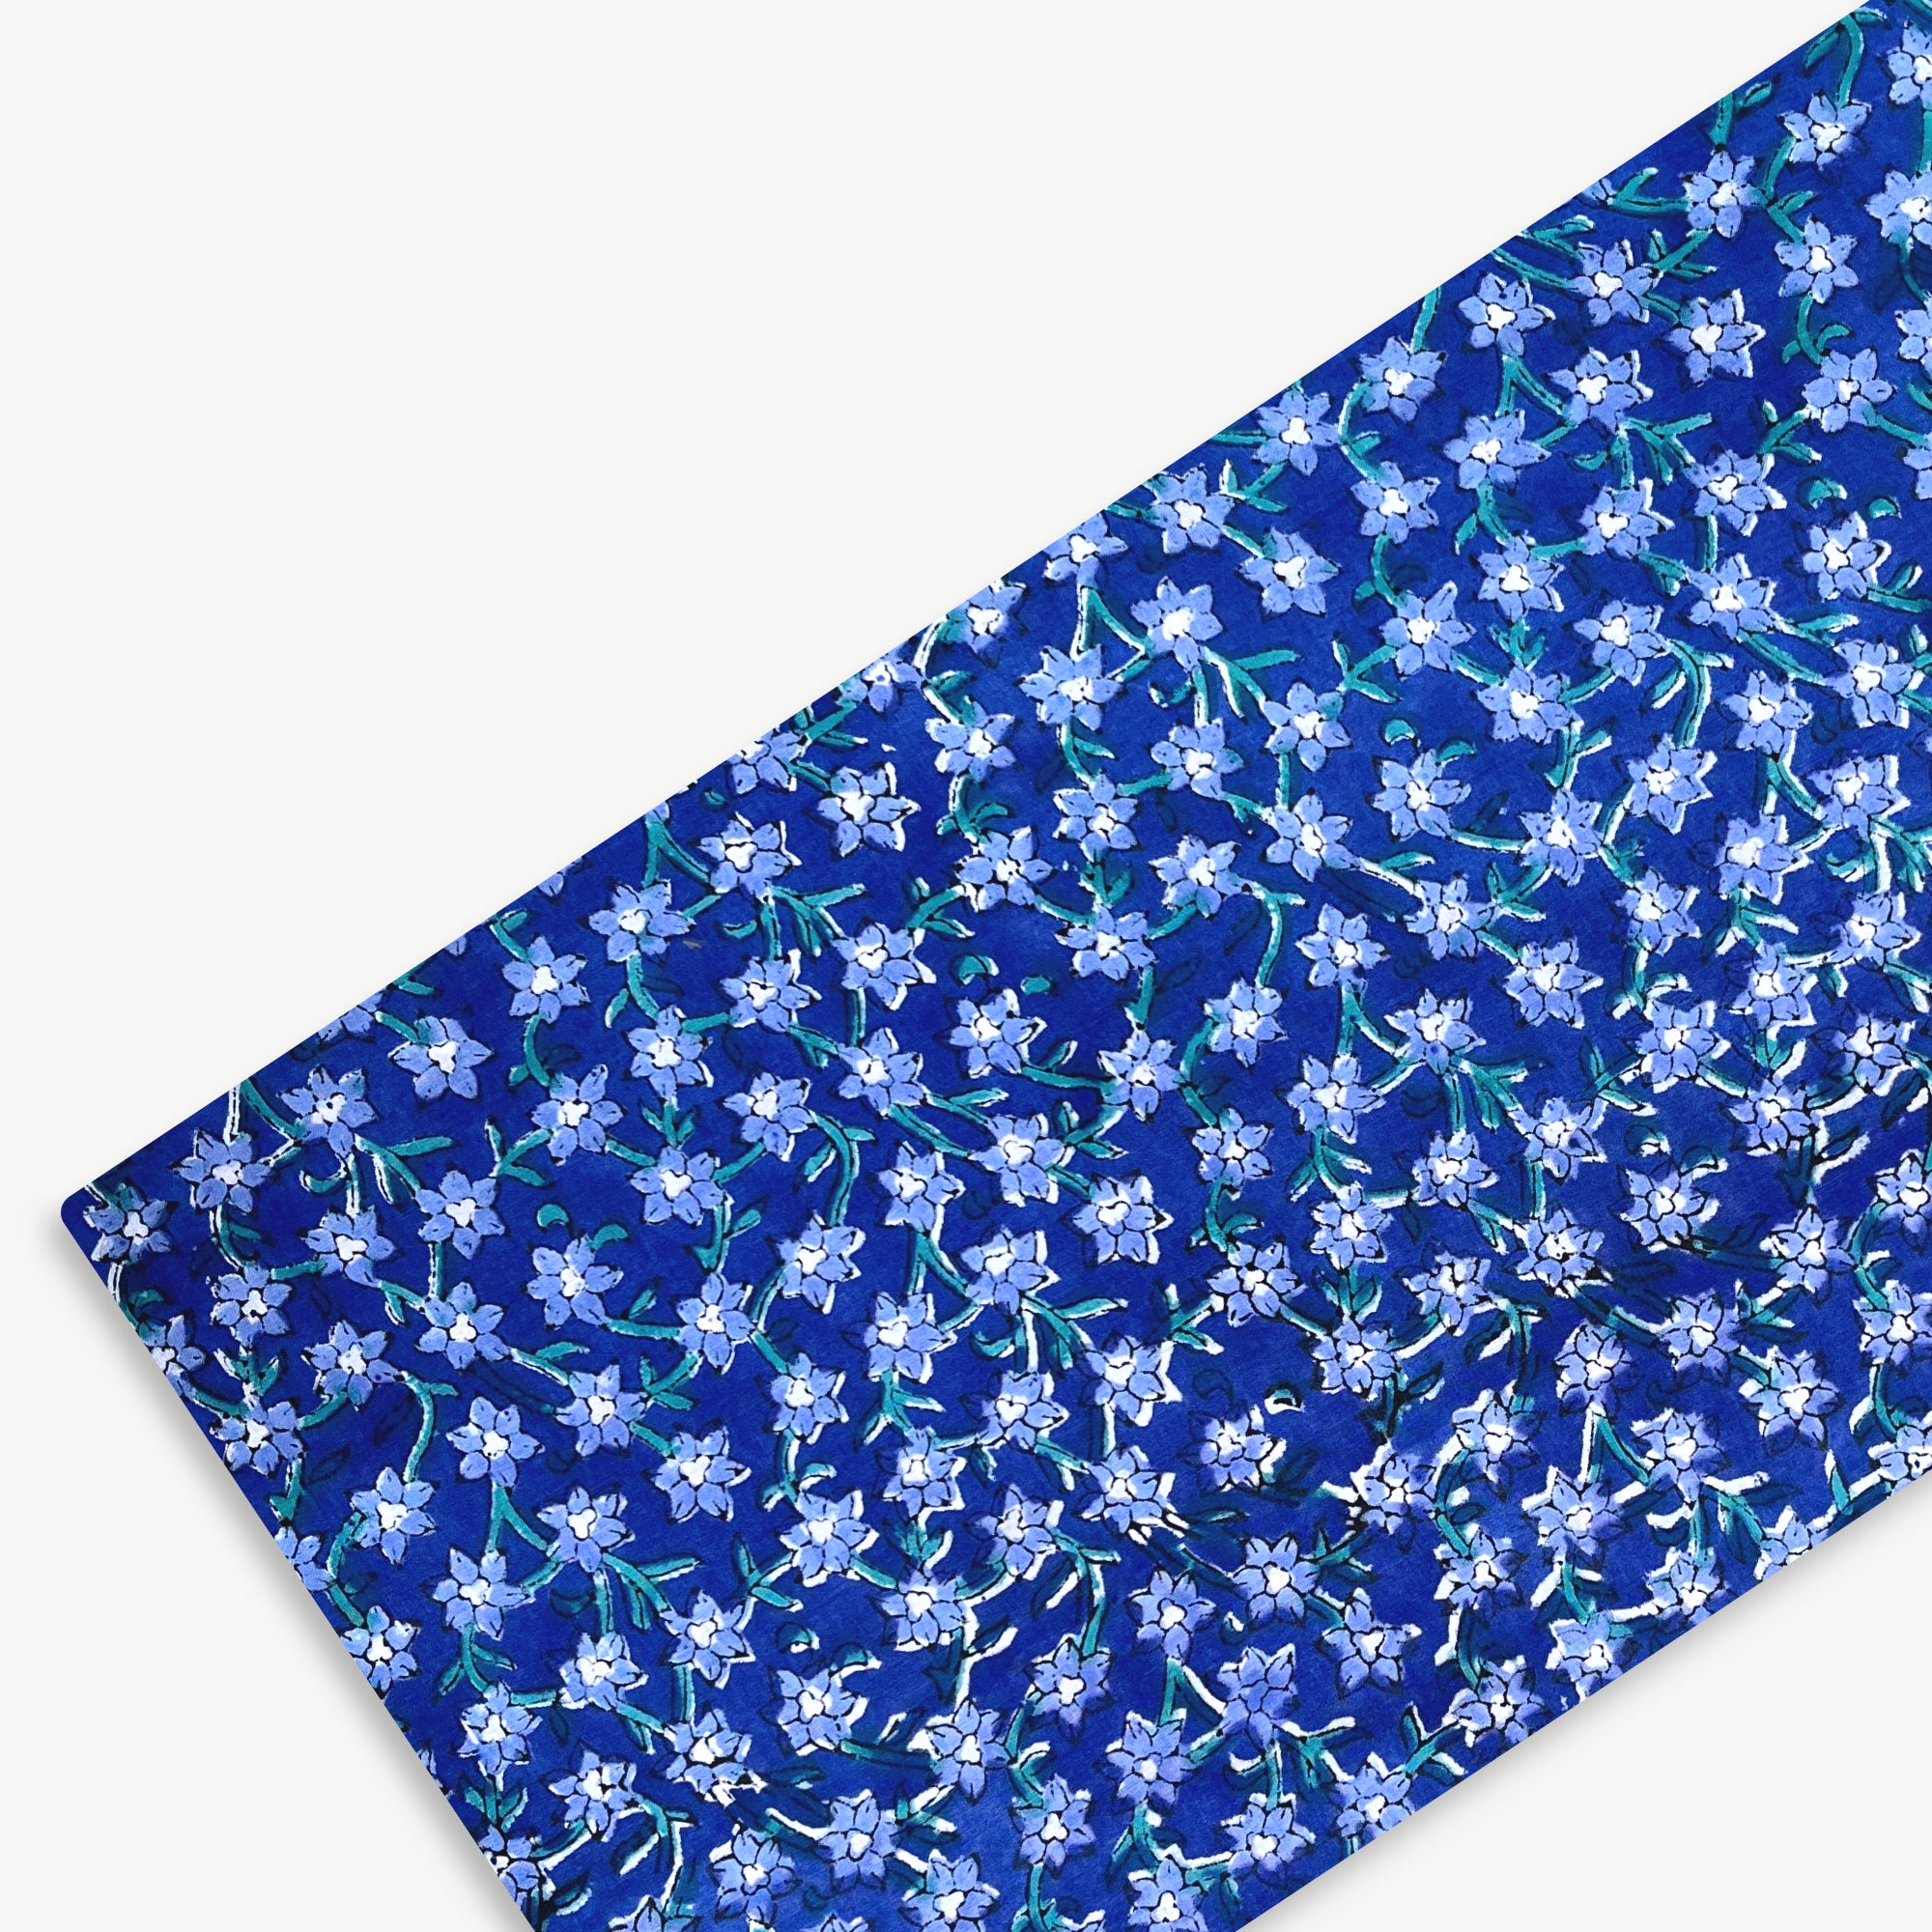 Blue Floral Mesh Jaal Rapid Hand Block Printed Cotton Fabric